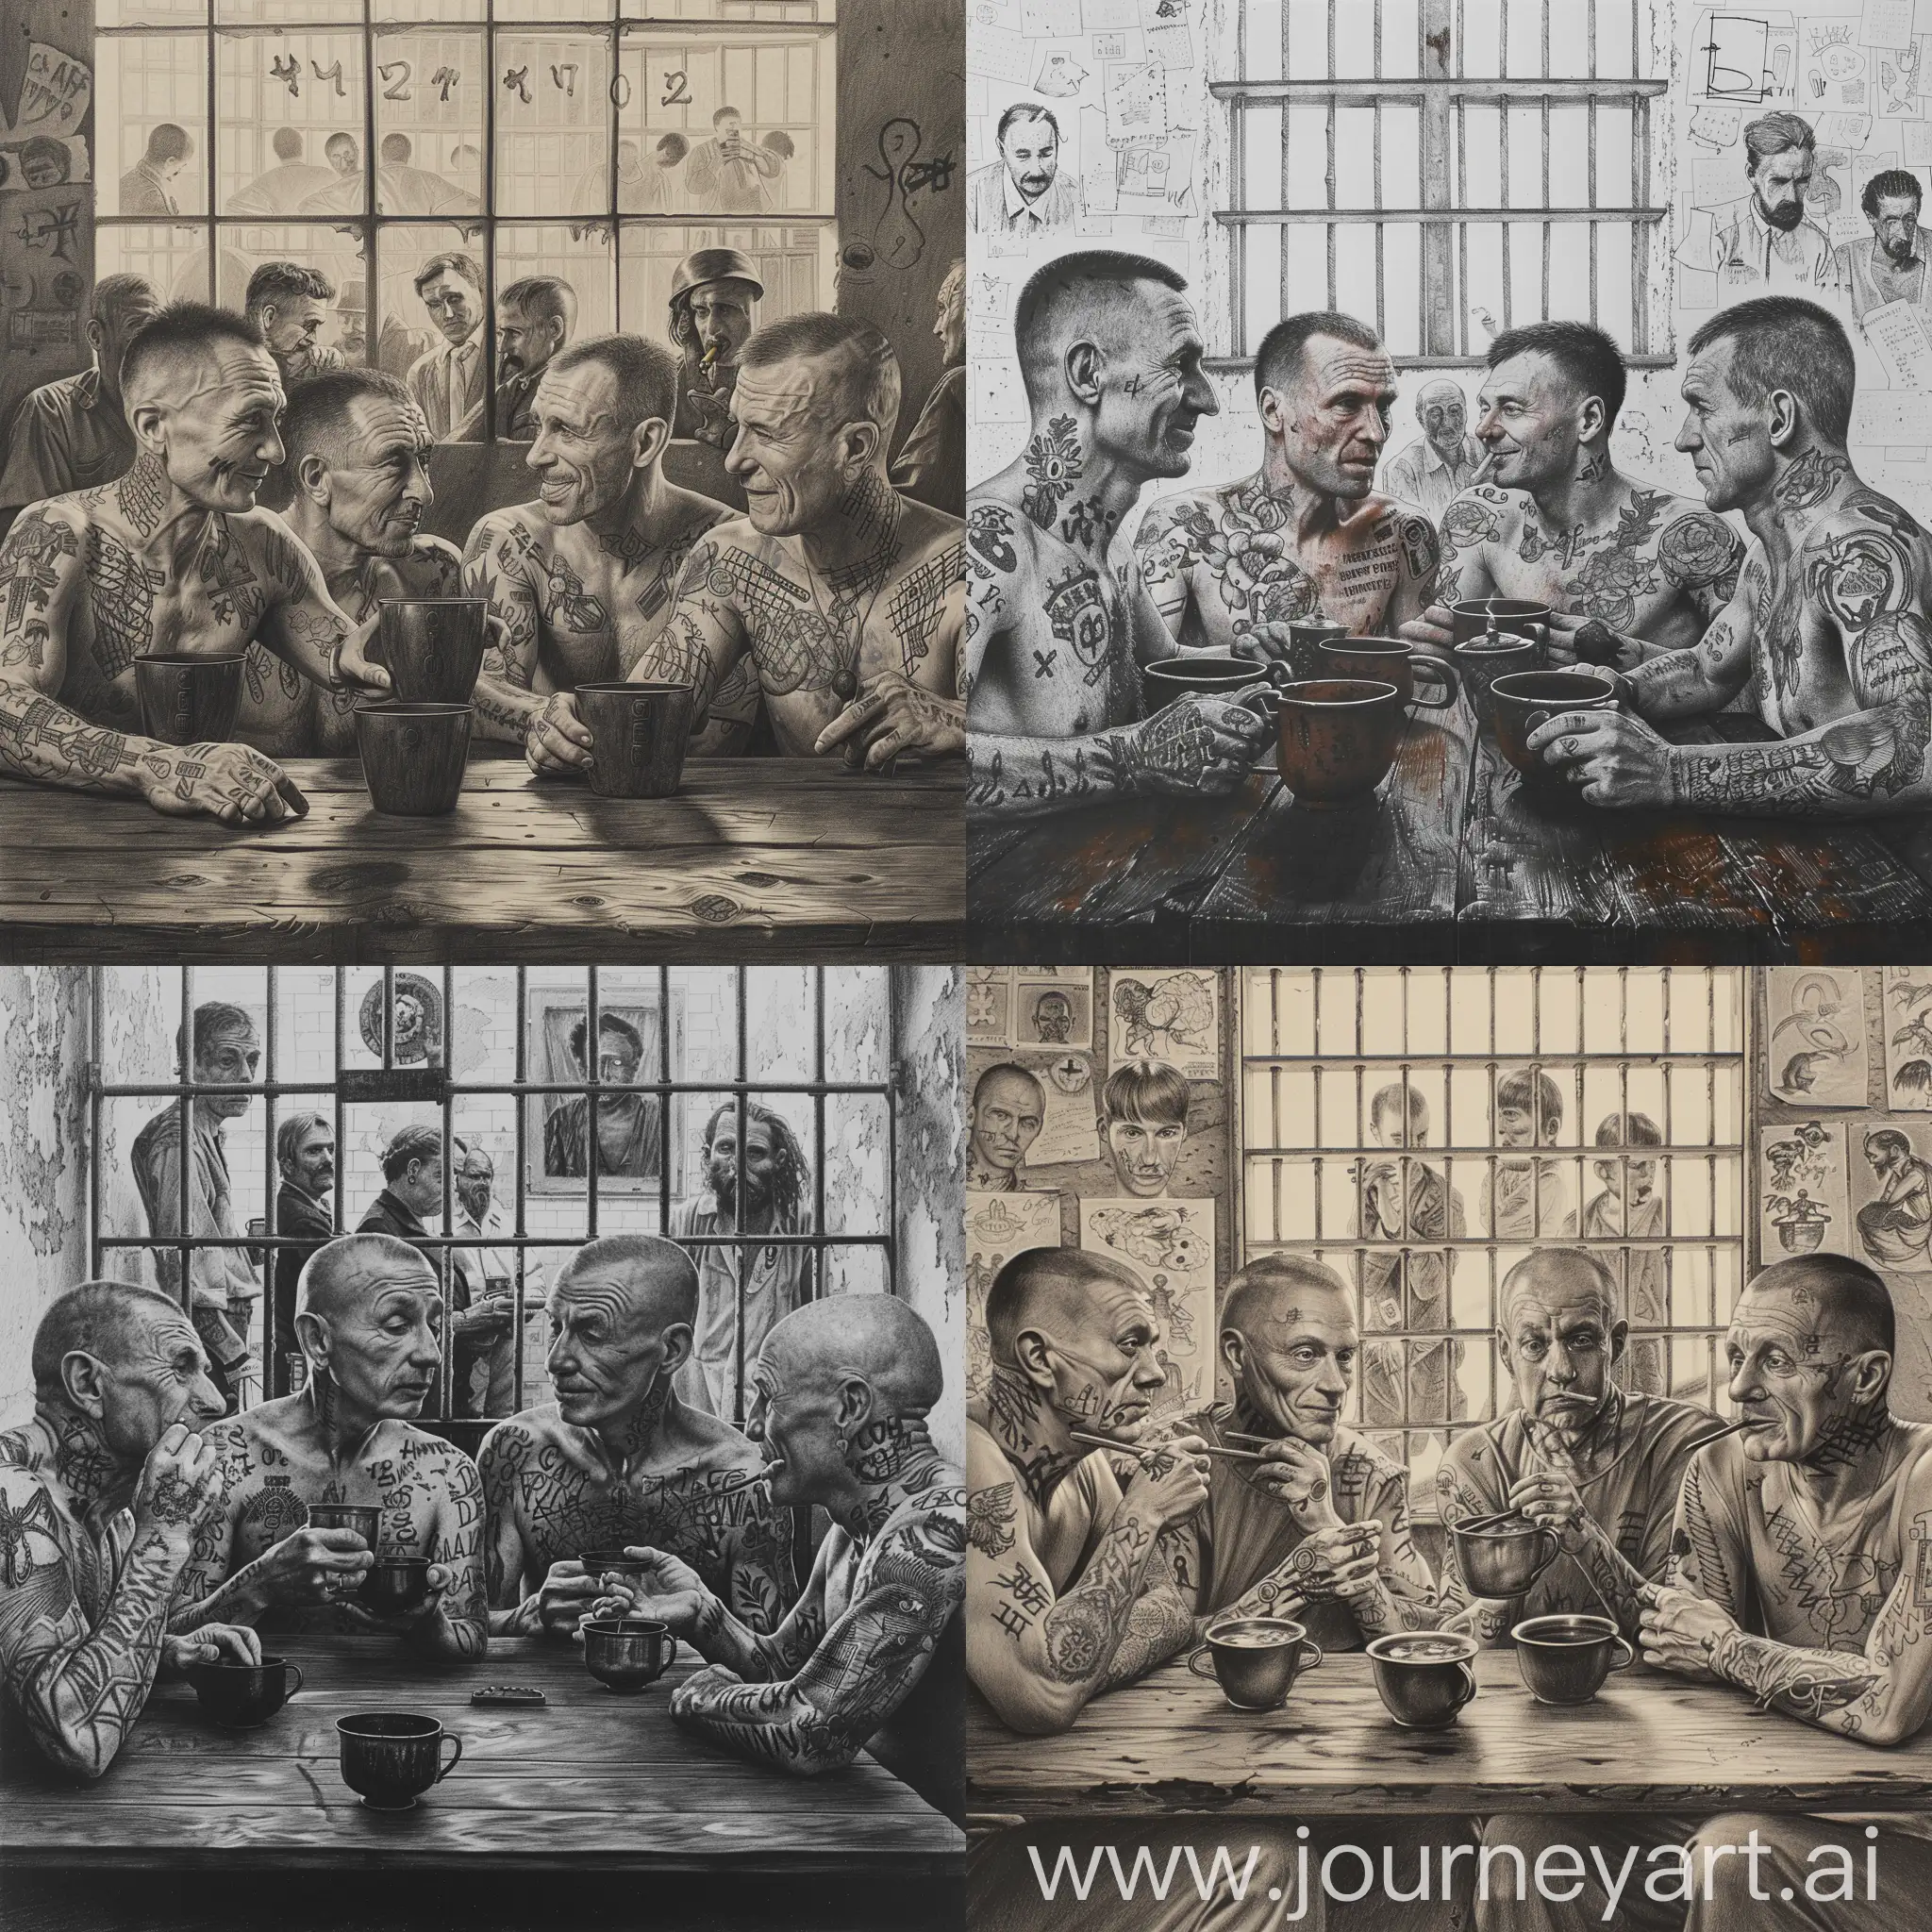 Authentic-Prison-Scene-Inmates-Sharing-Tea-and-Stories